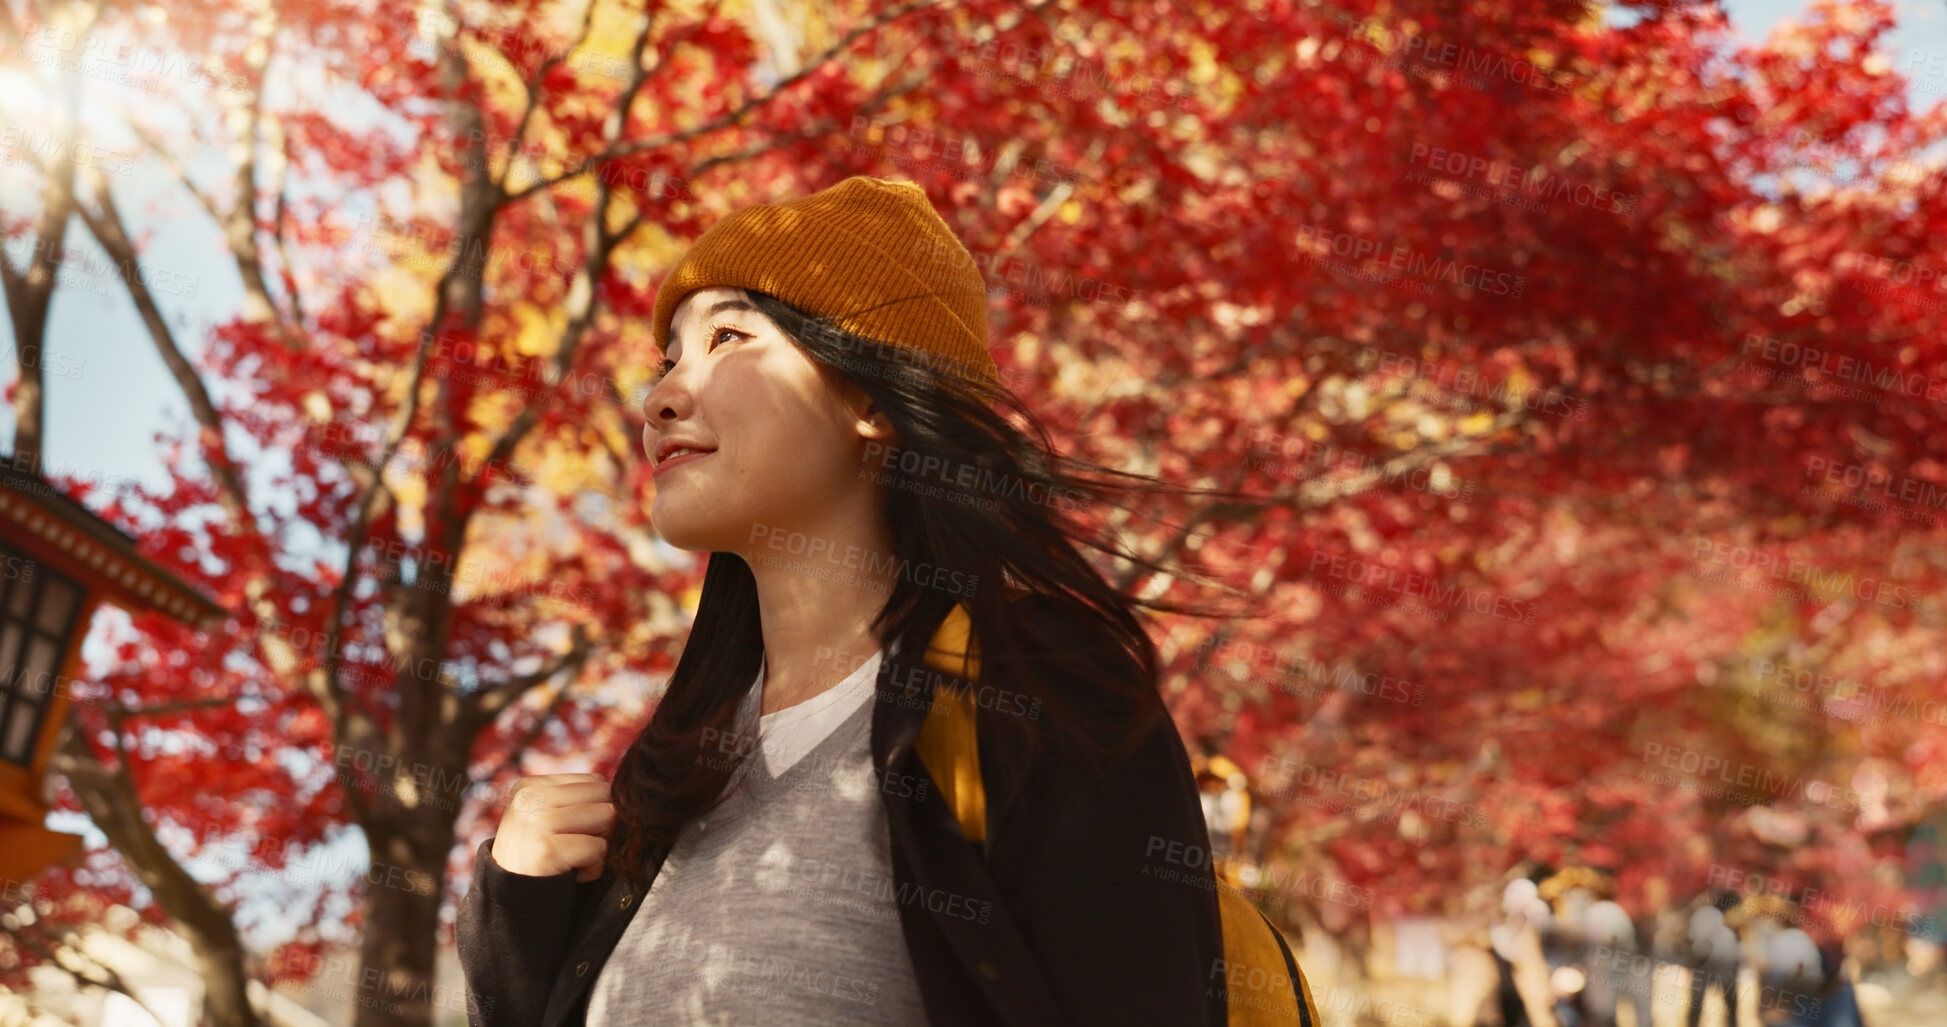 Buy stock photo Asian woman, autumn trees and walking in Japan for natural scenery, adventure or journey in nature. Female person smile with backpack or bag for outdoor trip with blooming plants or leaves in season